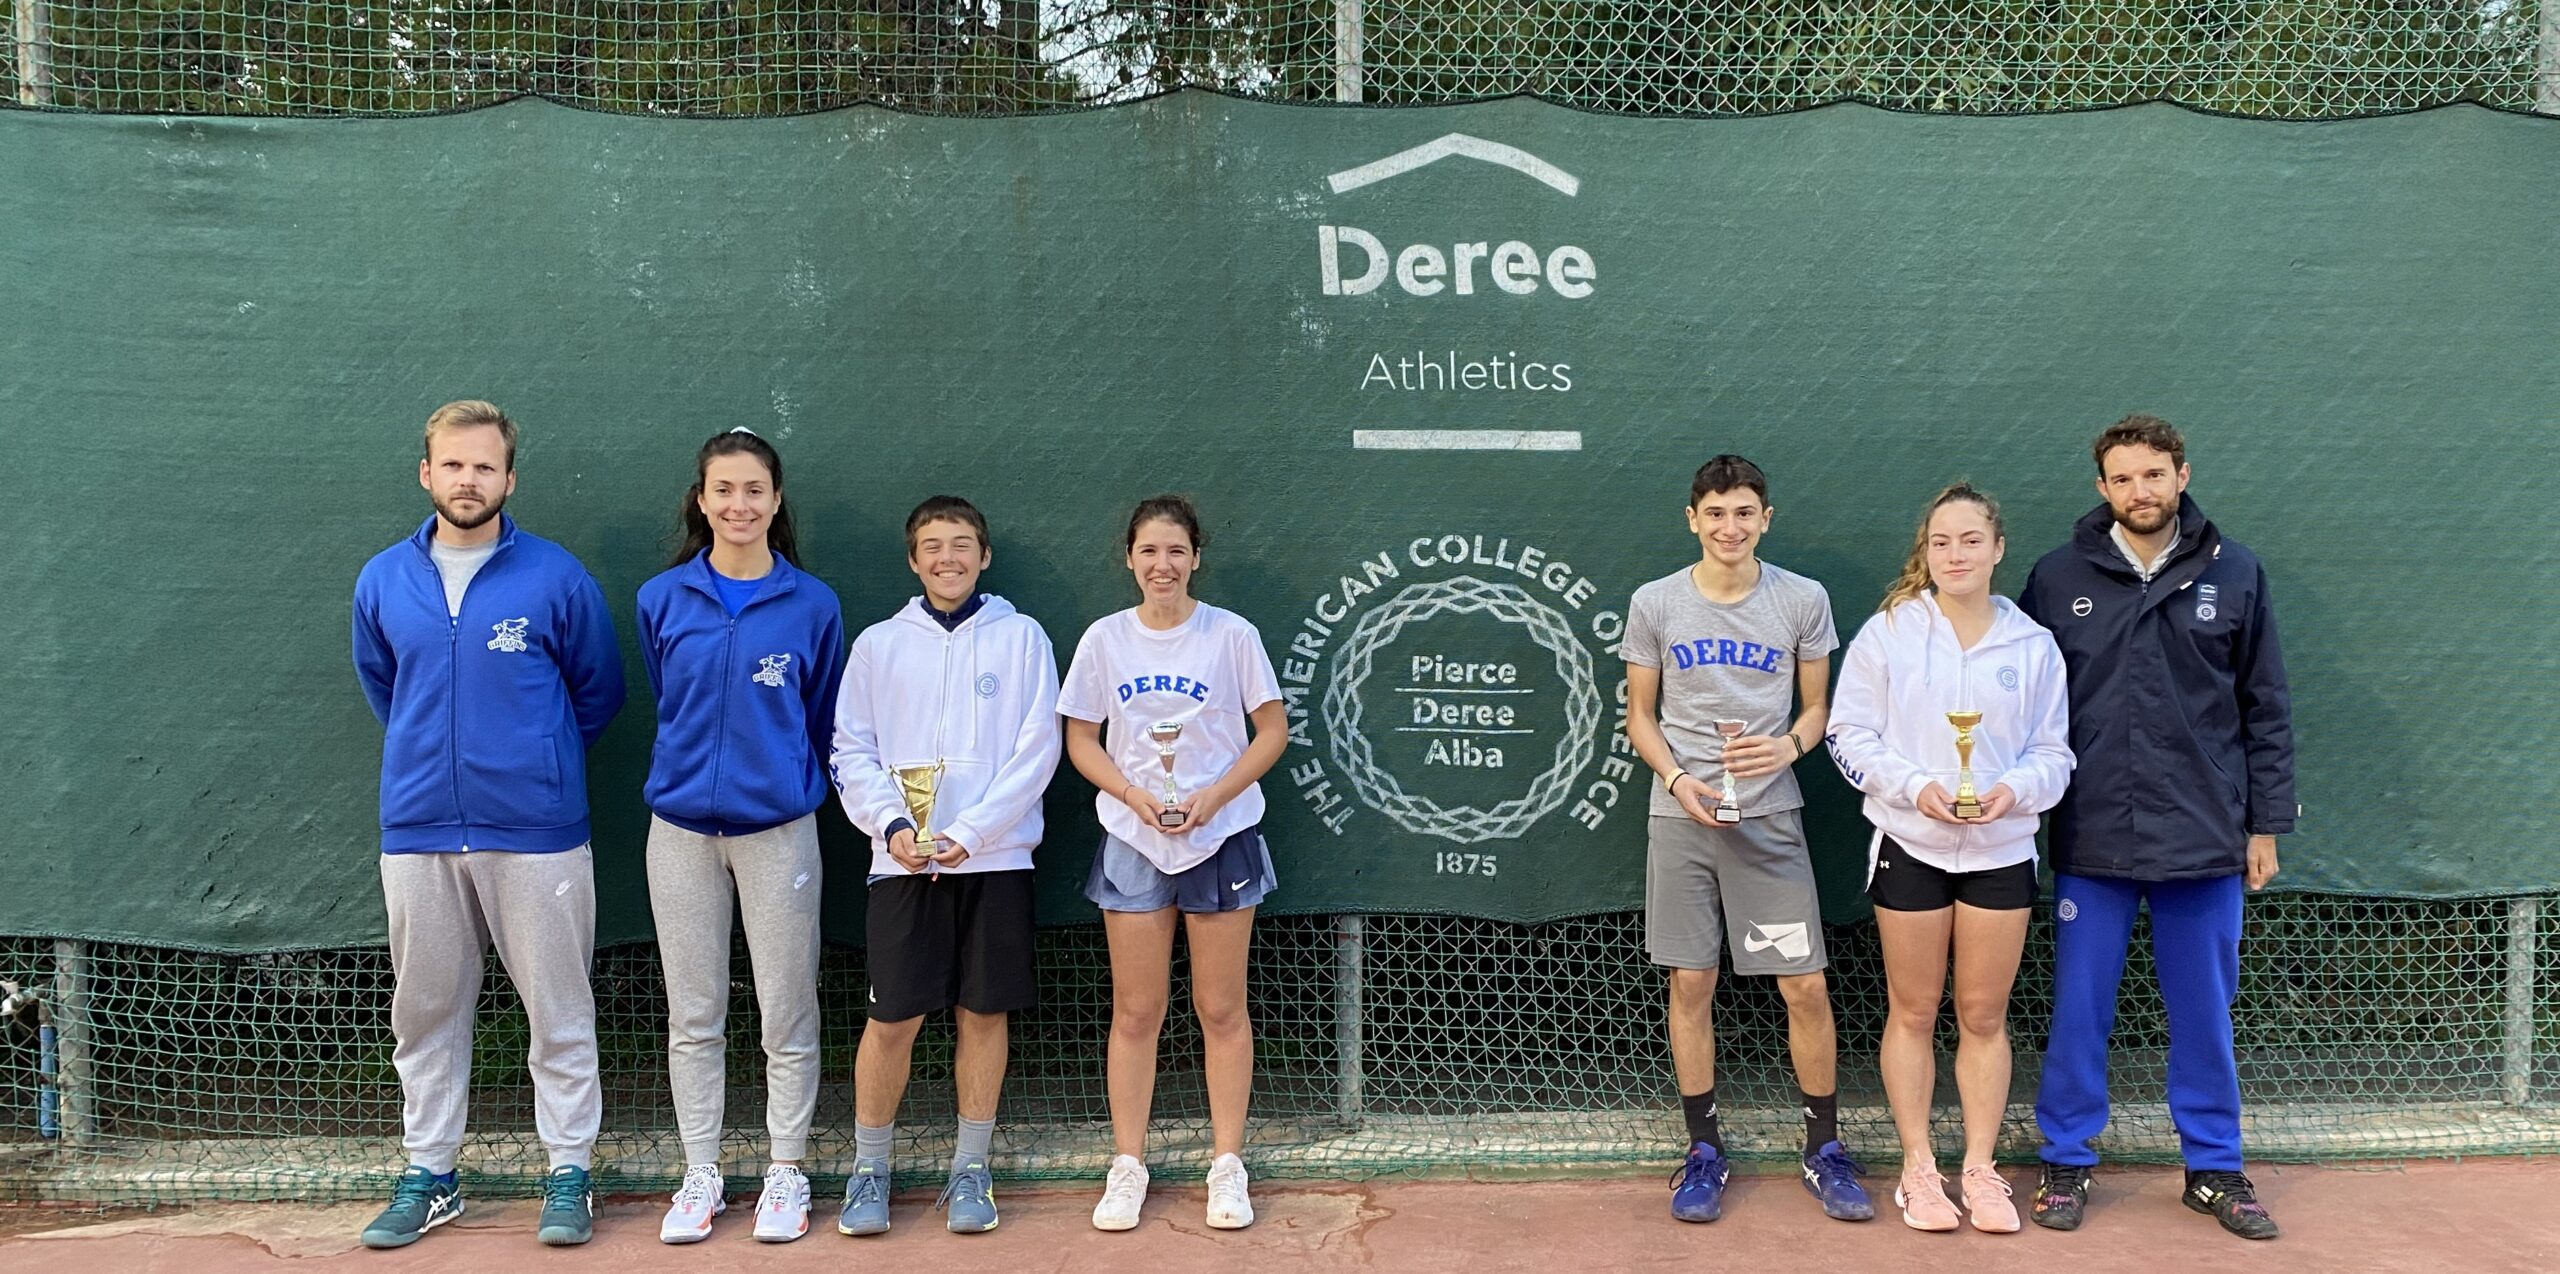 1st & 2nd place for the Deree Tennis Academy at U16 E3 Tennis Tournaments in Marathon and Ilioupoli!